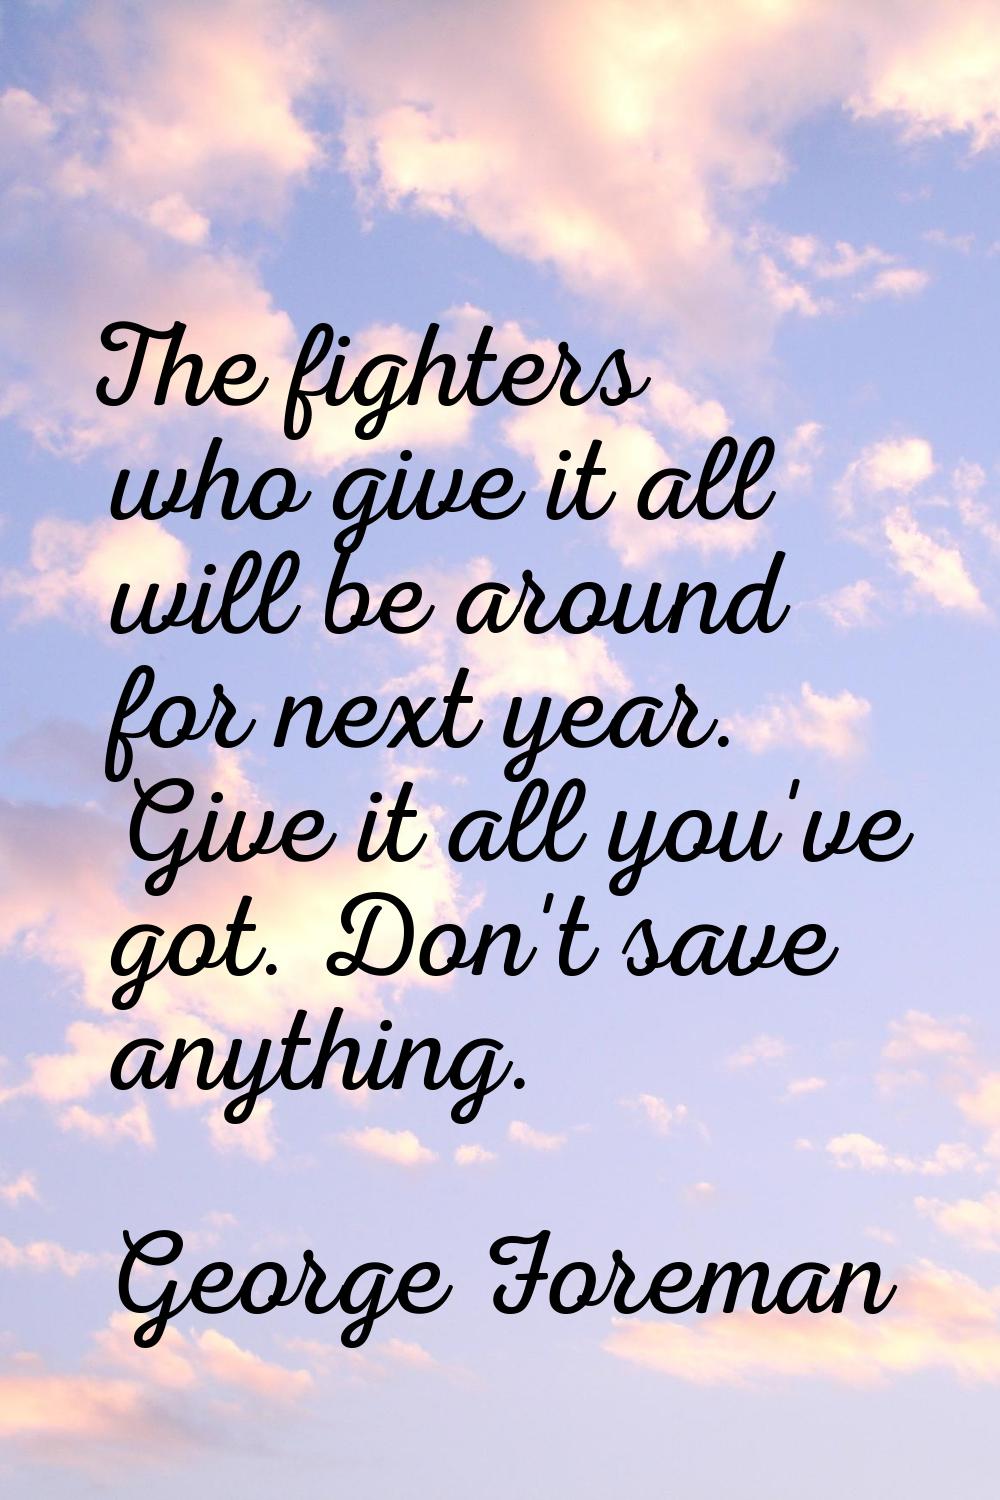 The fighters who give it all will be around for next year. Give it all you've got. Don't save anyth